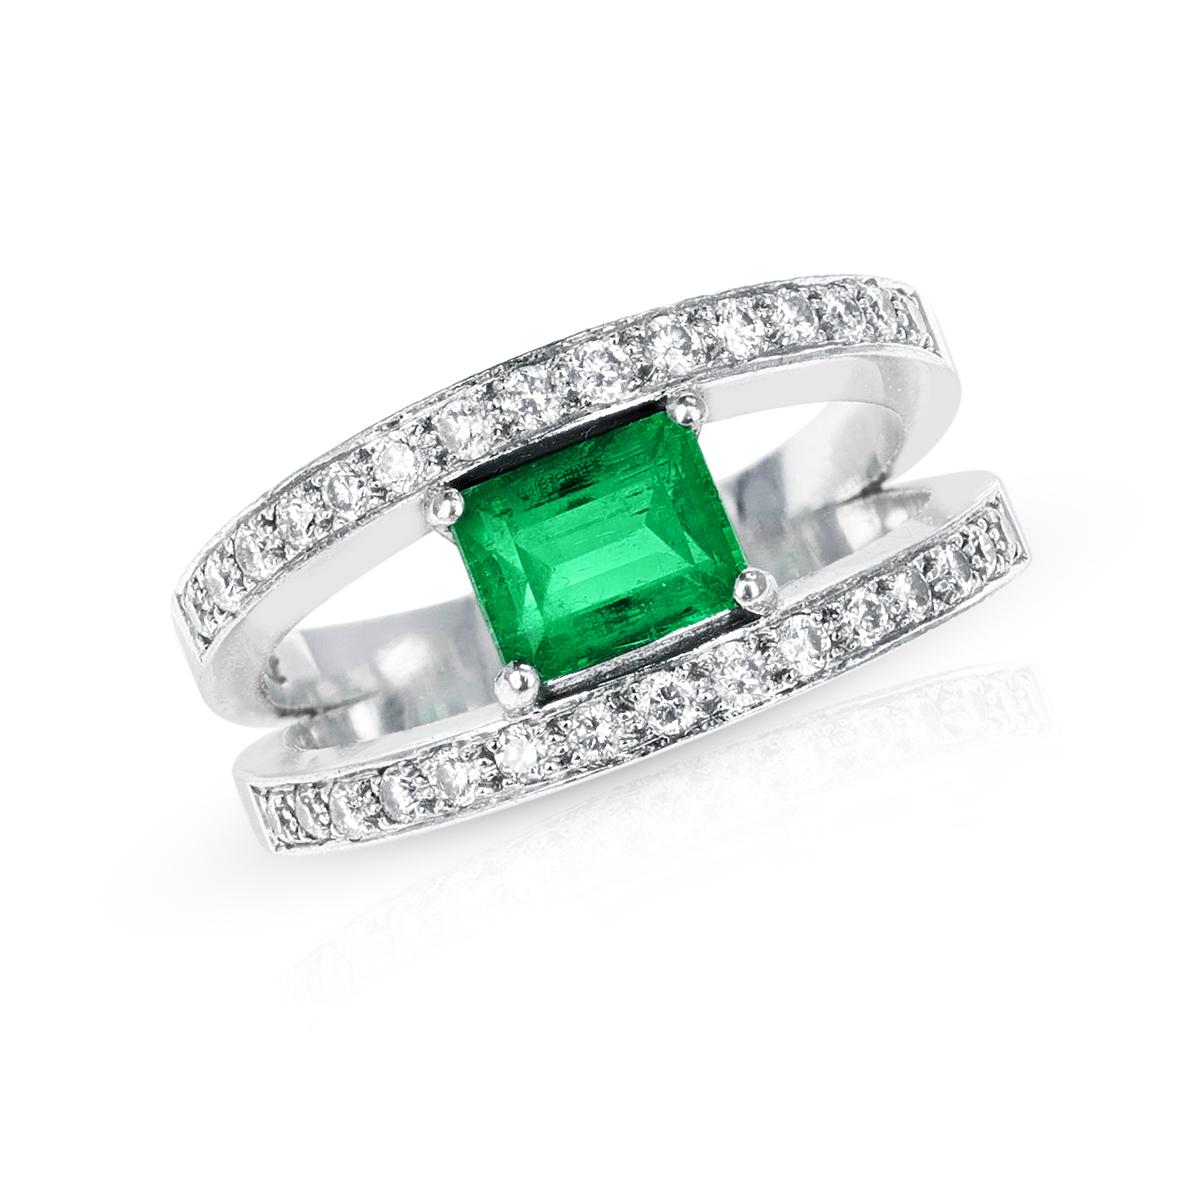 A fine Emerald-Cut Emerald and Diamond Double Row Ring made in 18 Karat White Gold. The Ring Size is US 10. The total weight of the ring is 11.51 grams.